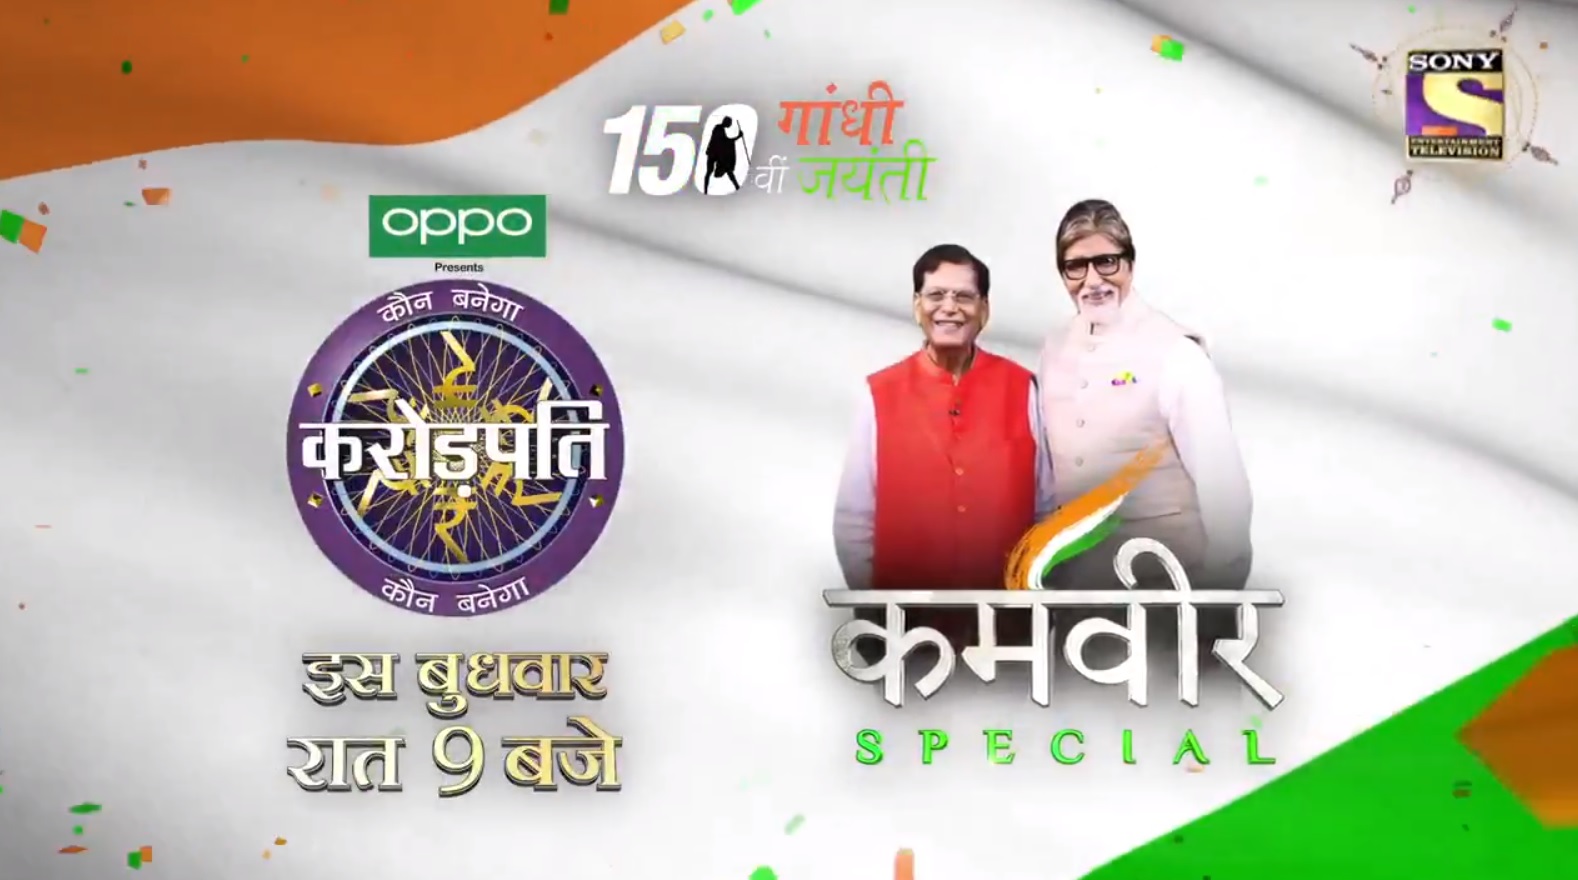 Our special KBCKaramveer episode KBC11 on the occasion of Gandhi Jayanti